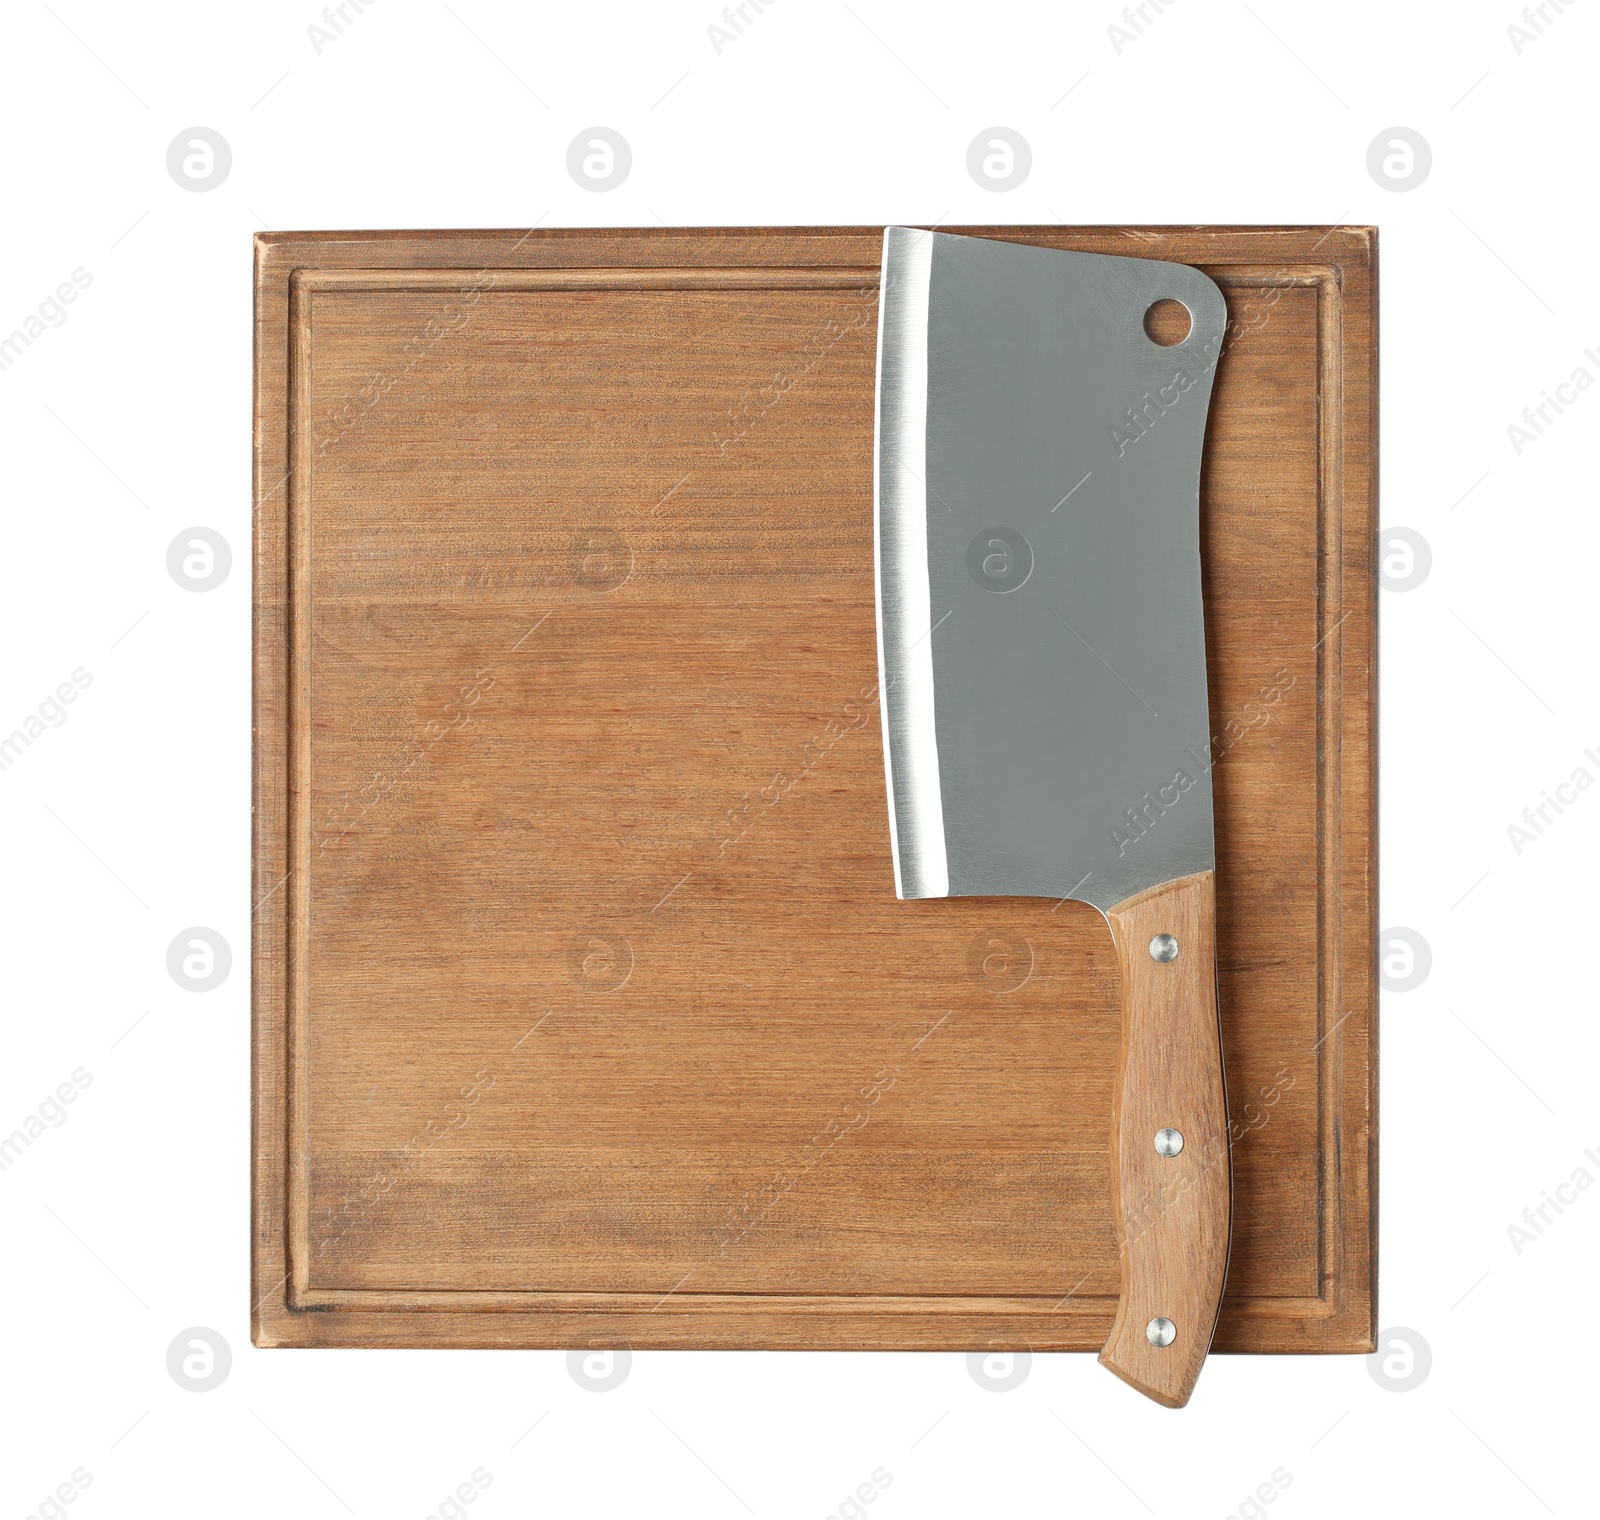 Photo of Sharp cleaver knife with wooden board isolated on white, top view